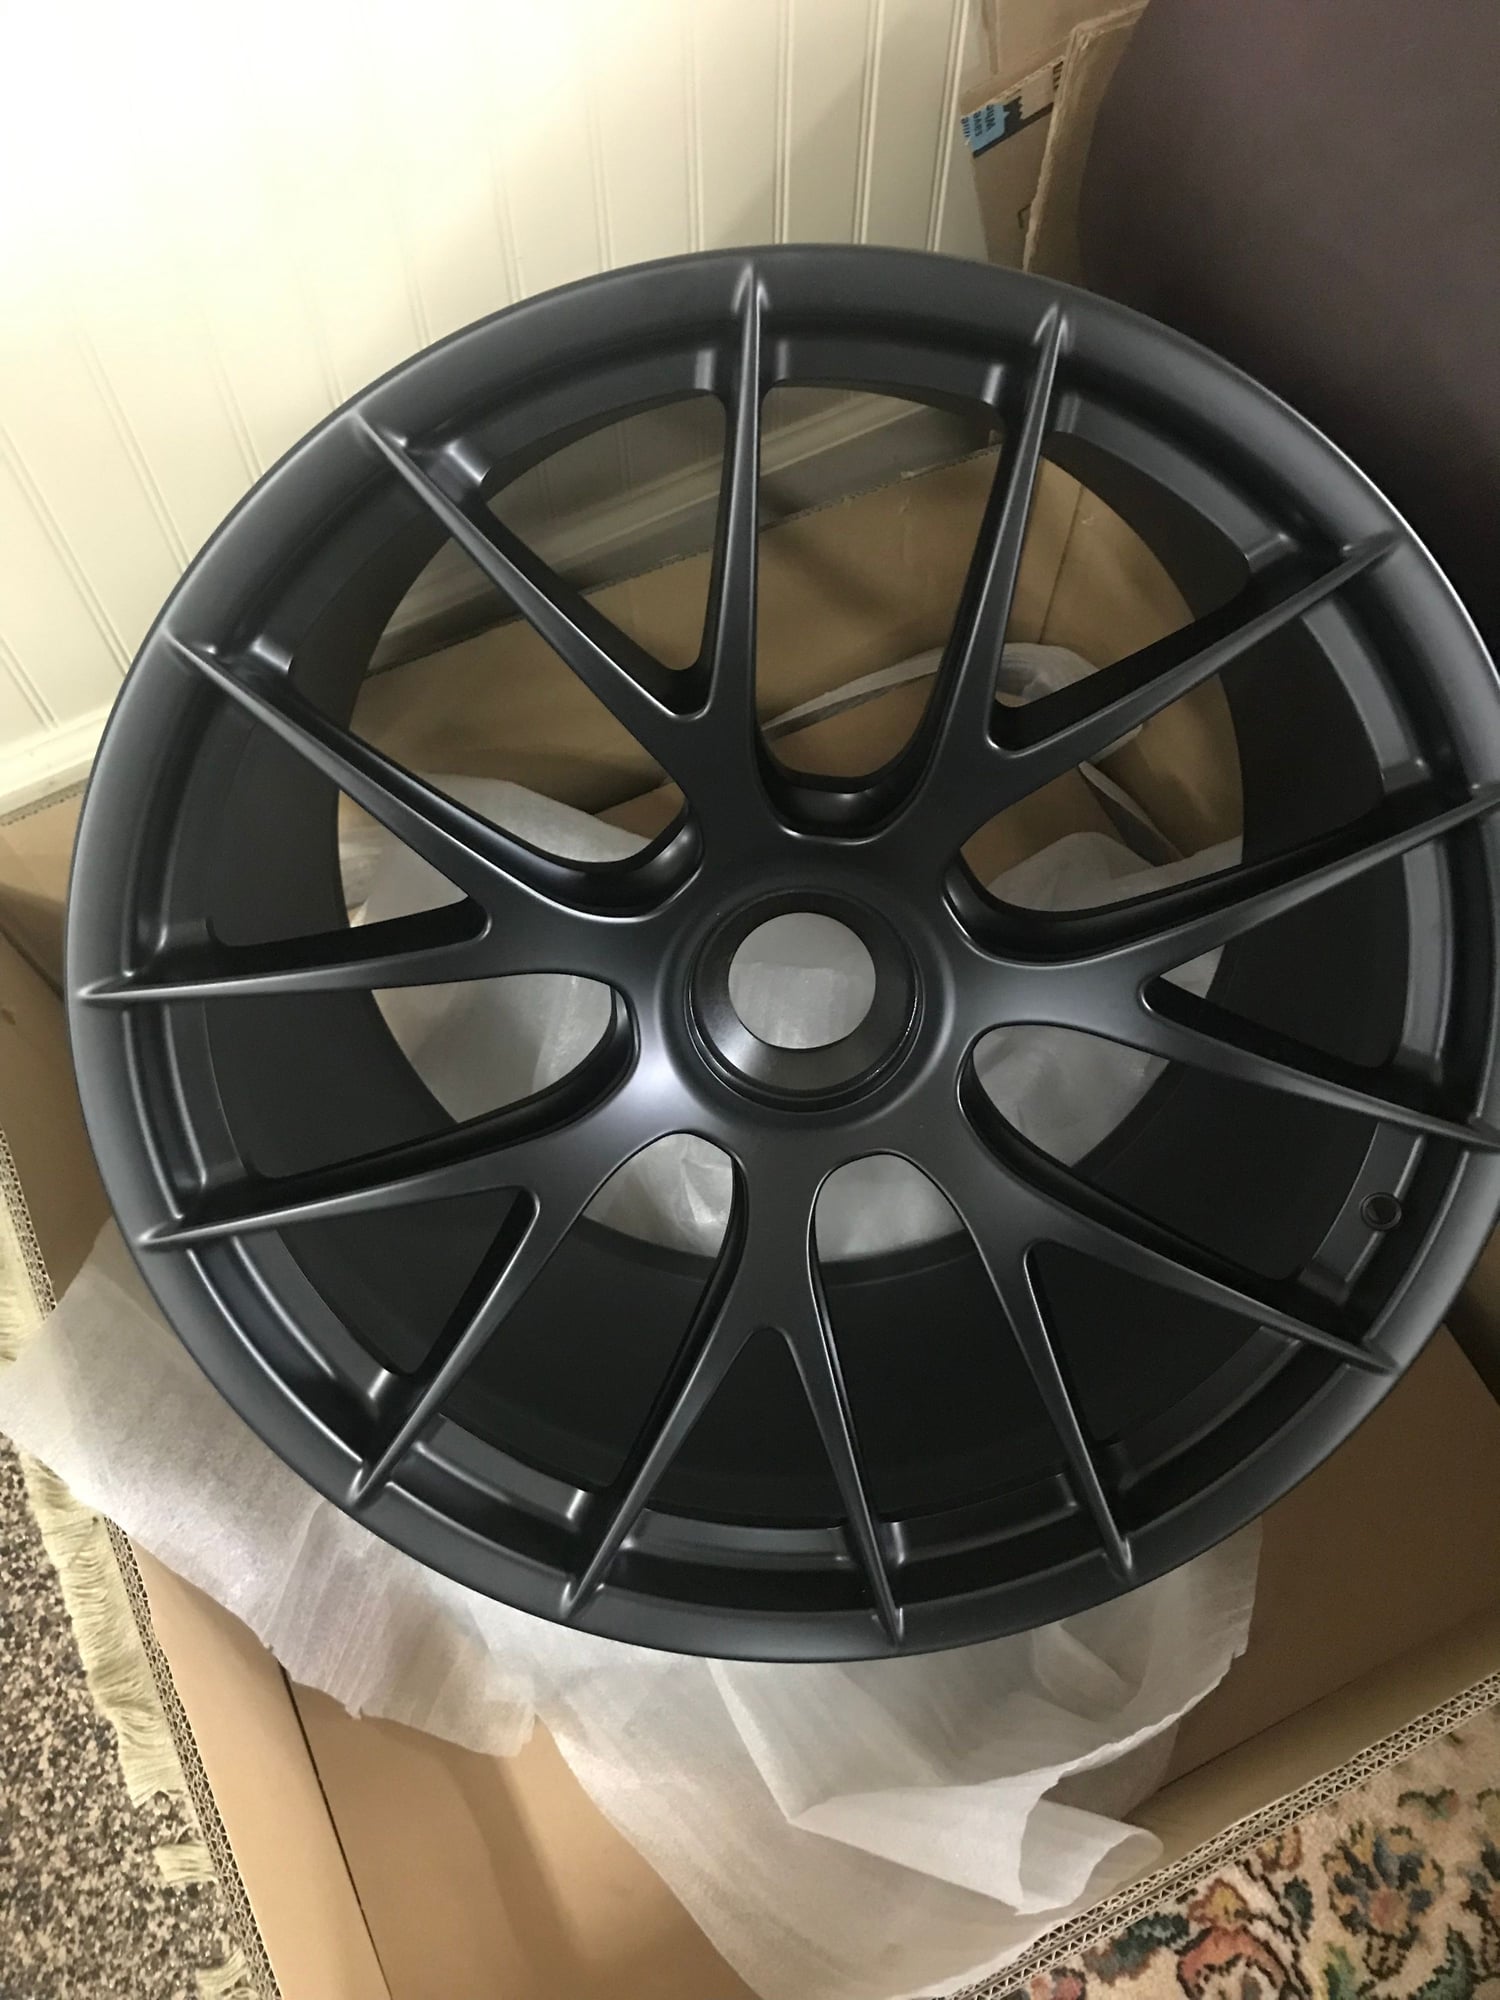 Wheels and Tires/Axles - OEM GT2 RS Magnesium Wheels - New - 2019 Porsche GT2 - Roswell, GA 30076, United States